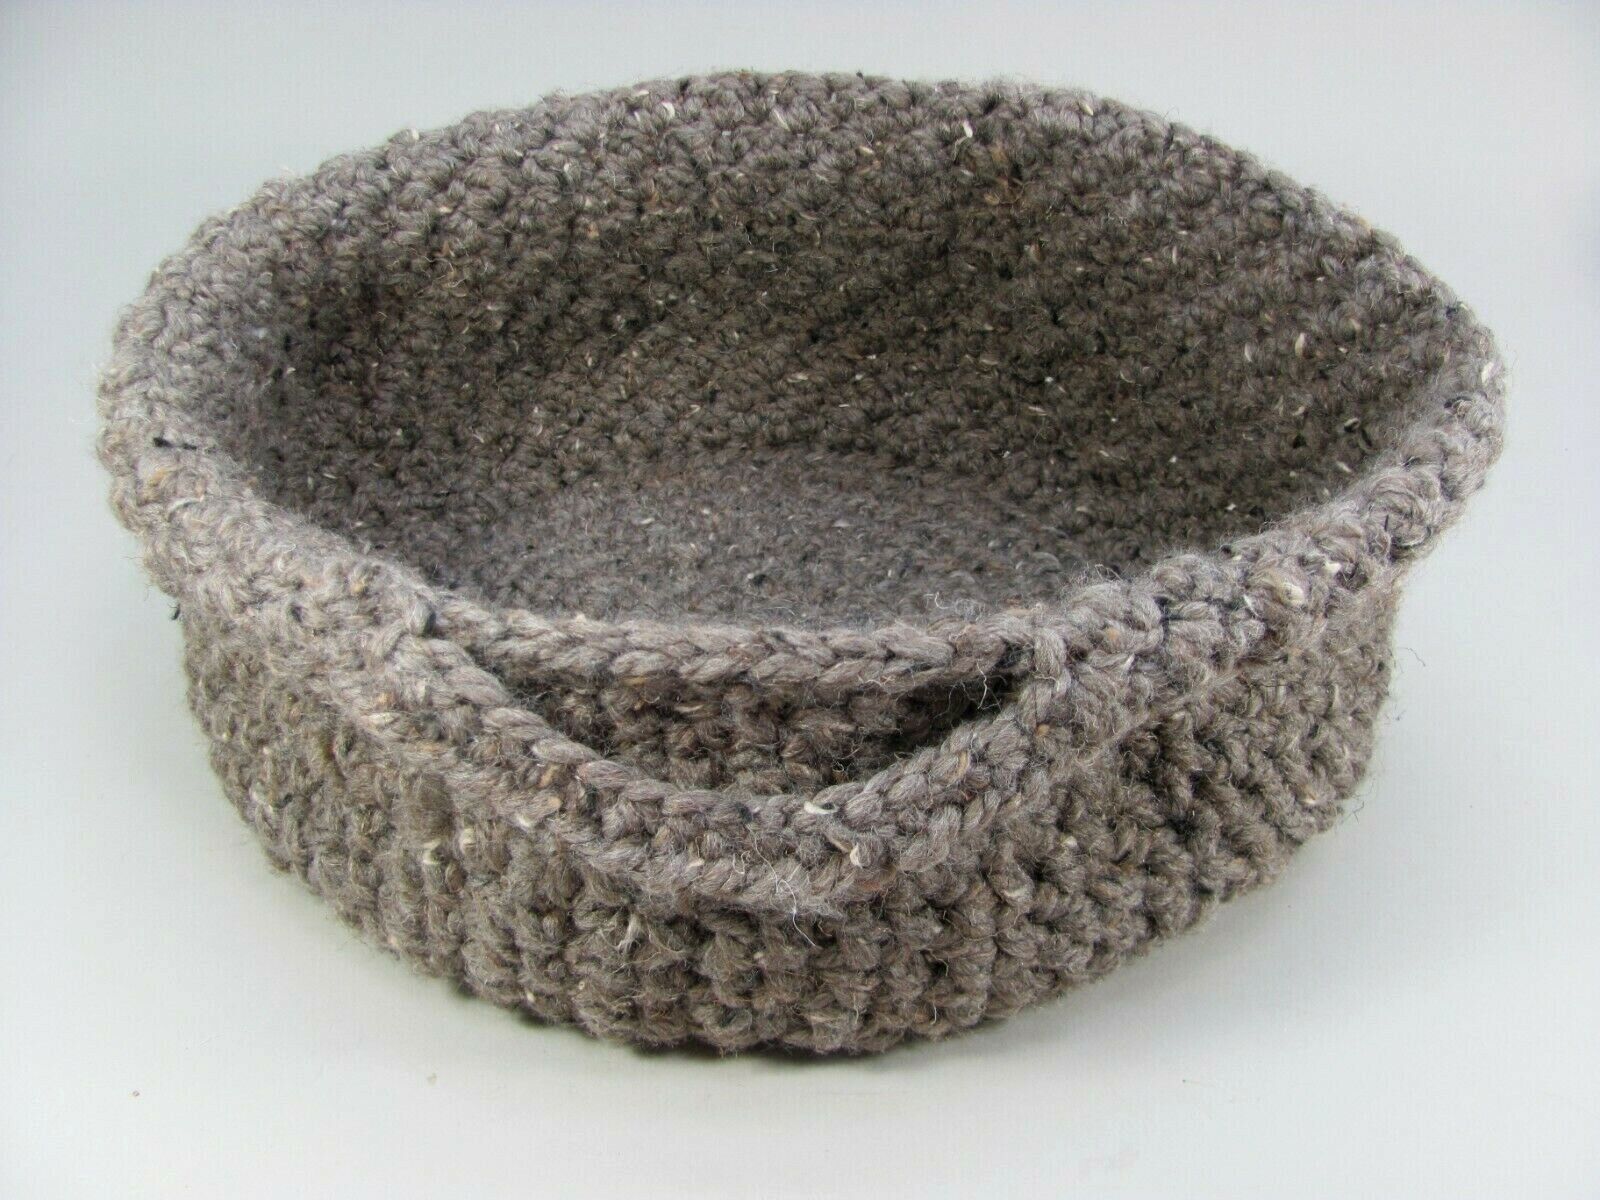 Handmade Crochet Bulky Knit Basket with Side specialty shop Handles Genuine Free Shipping Soft Medium